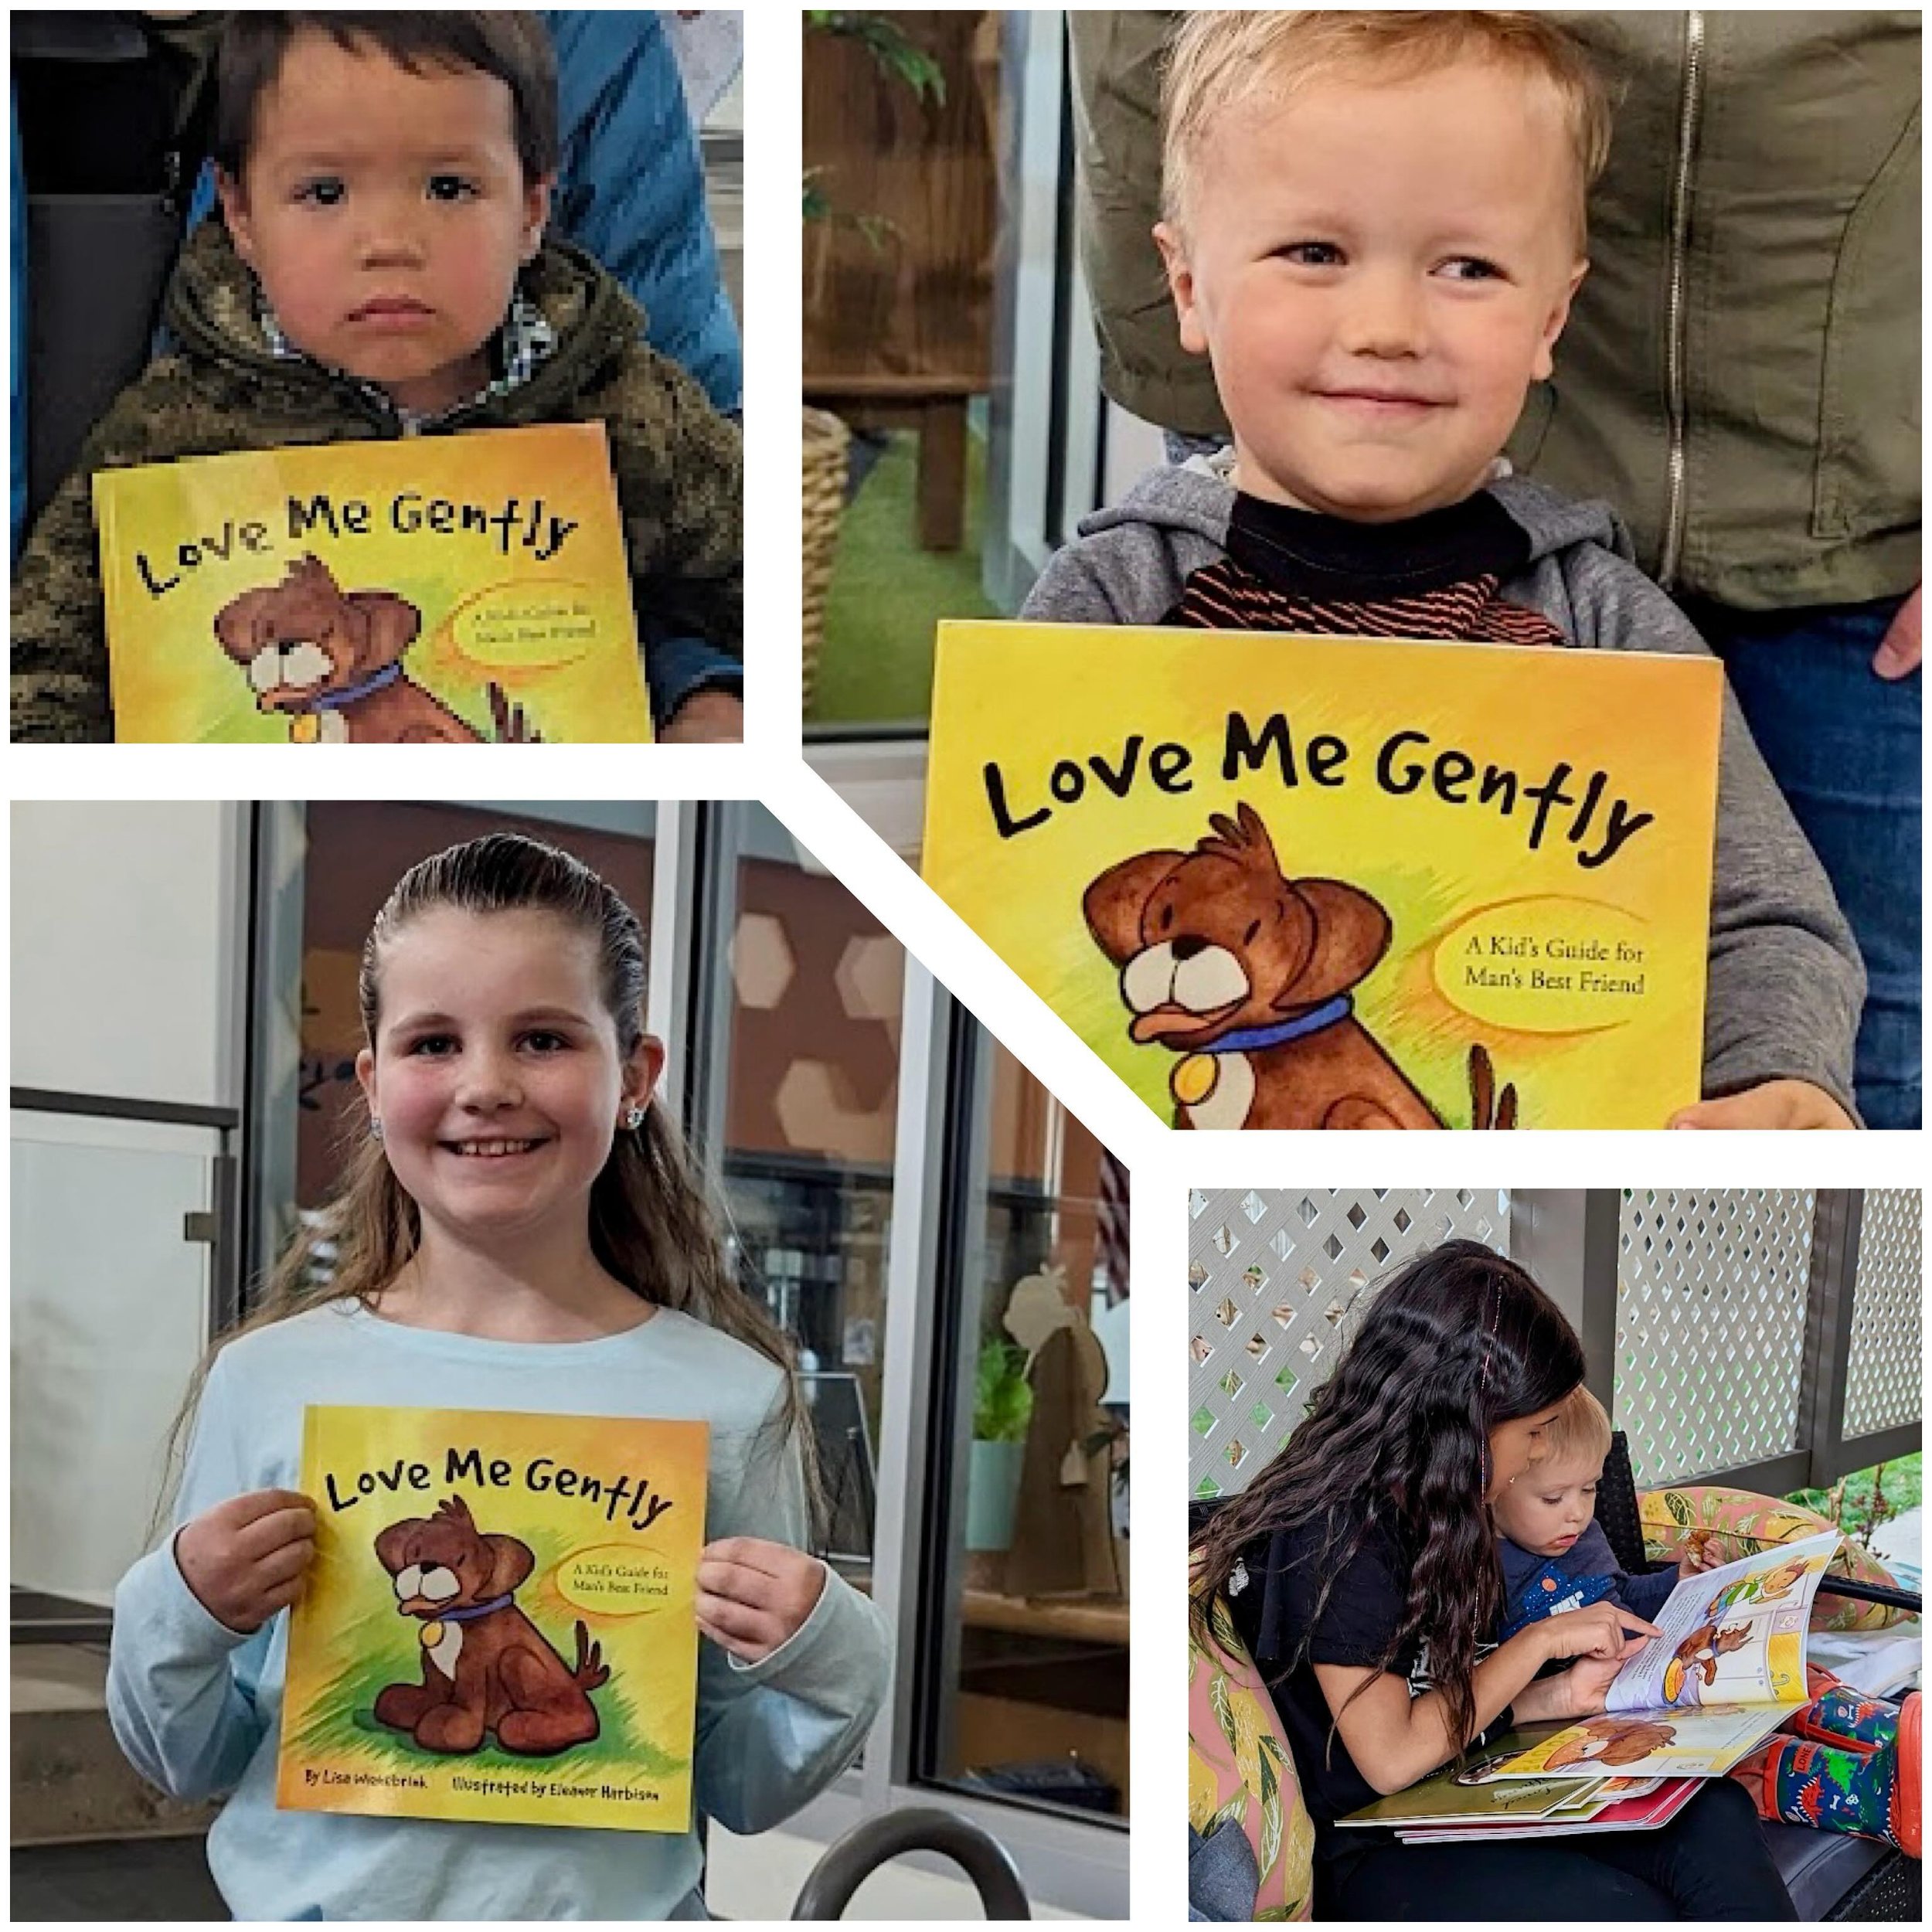 Humane education story time&hellip;inspiring kindness and encouraging literacy! Great work @longmonthumanesocietyofficial we&rsquo;re proud to partner with you! #humaneeducation #literacy #dog #puppy #booksforkids #bookdonation #teachthemyoung #inspi